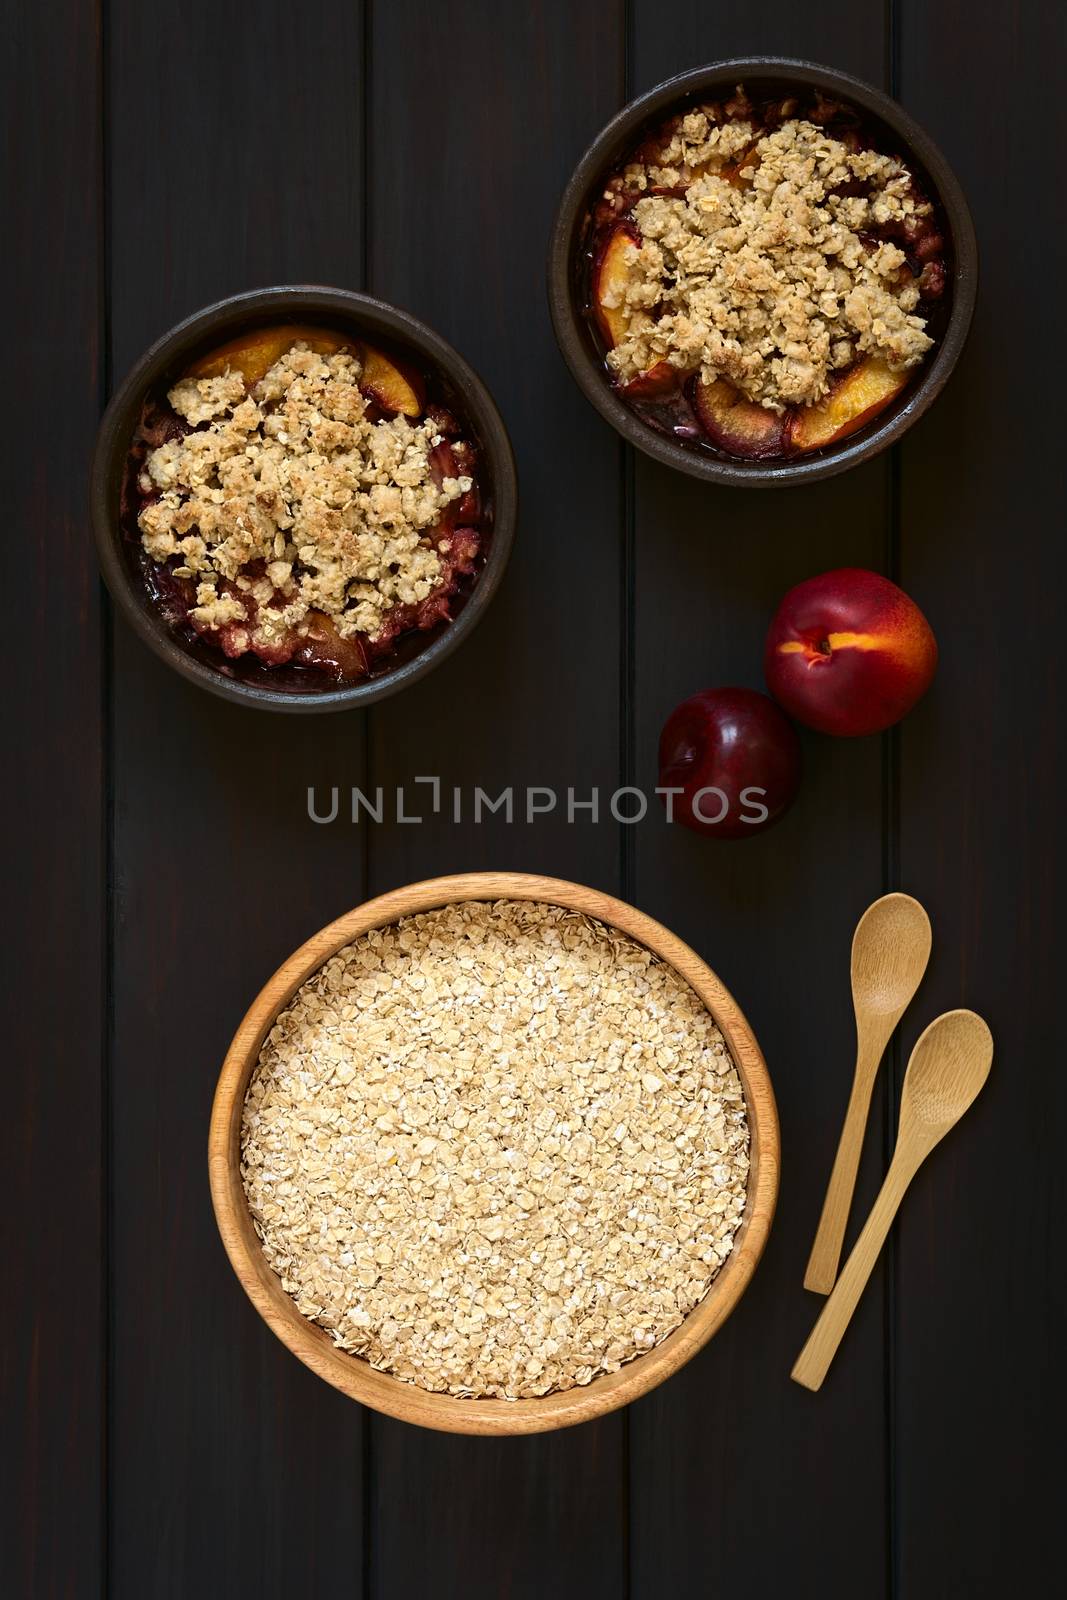 Overhead shot of a wooden bowl of rolled oats with two rustic bowls of plum and nectarine crumble, photographed on dark wood with natural light